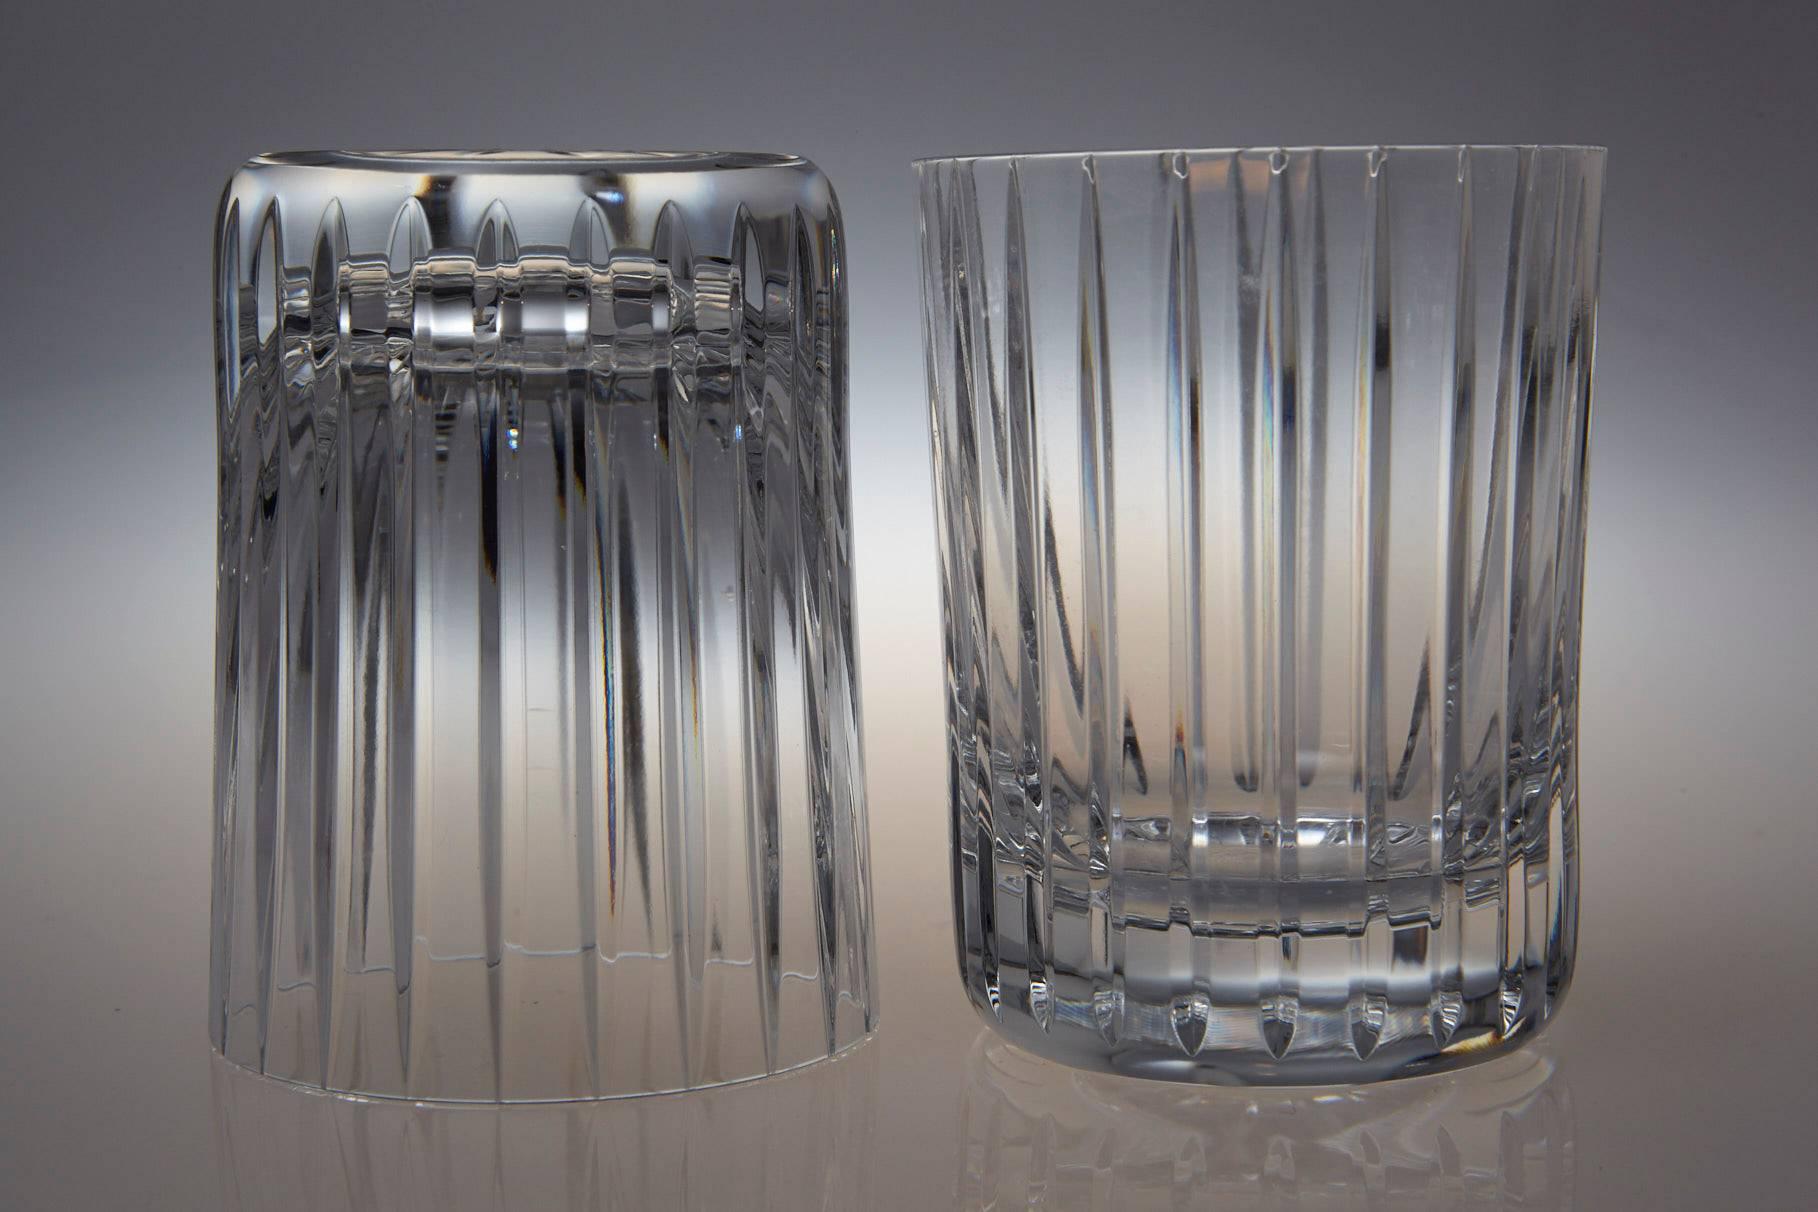 The timeless and very graphic Baccarat Harmonie bar pattern was introduced in 1975 and is until today Baccarats top selling bar pattern of all time.
Consecutive vertical cuts from the top of the rim to the base emphasize the vertical graphical